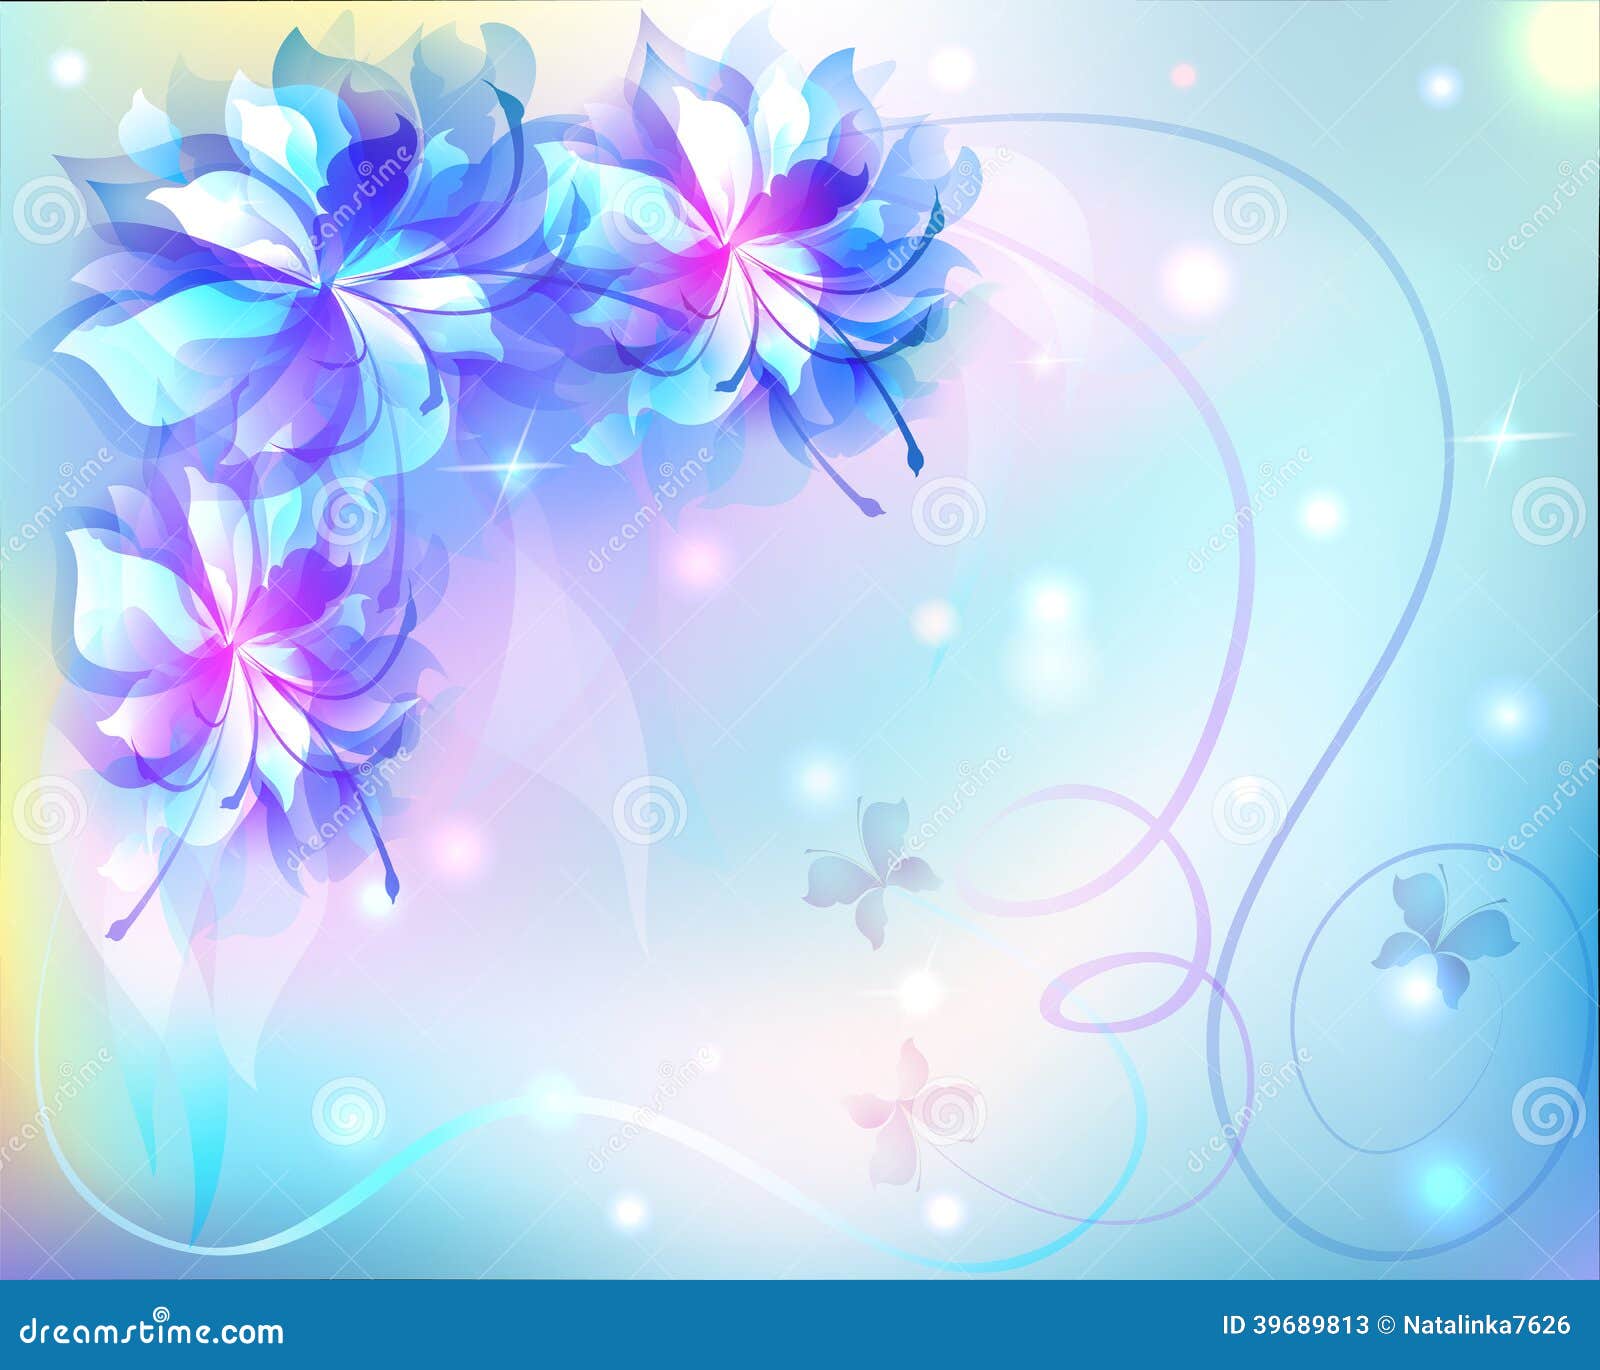 Floral Flowers Light Effect Purple Abstract Nature Powerpoint Background  For Free Download - Slidesdocs